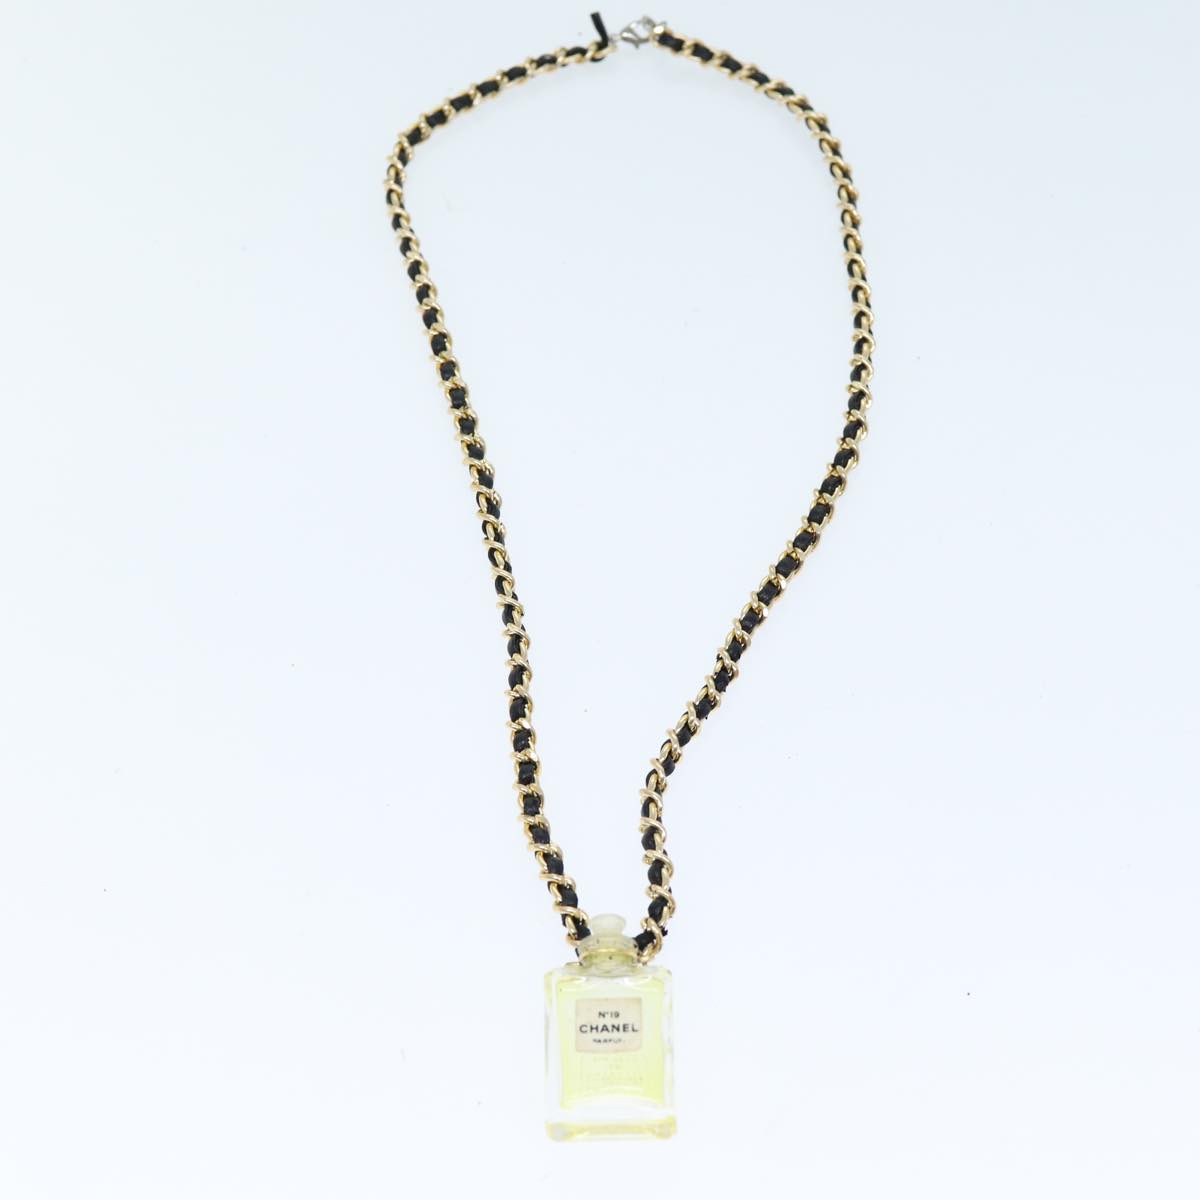 CHANEL Perfume N°19 Necklace Metal Leather Gold Black CC Auth bs13938